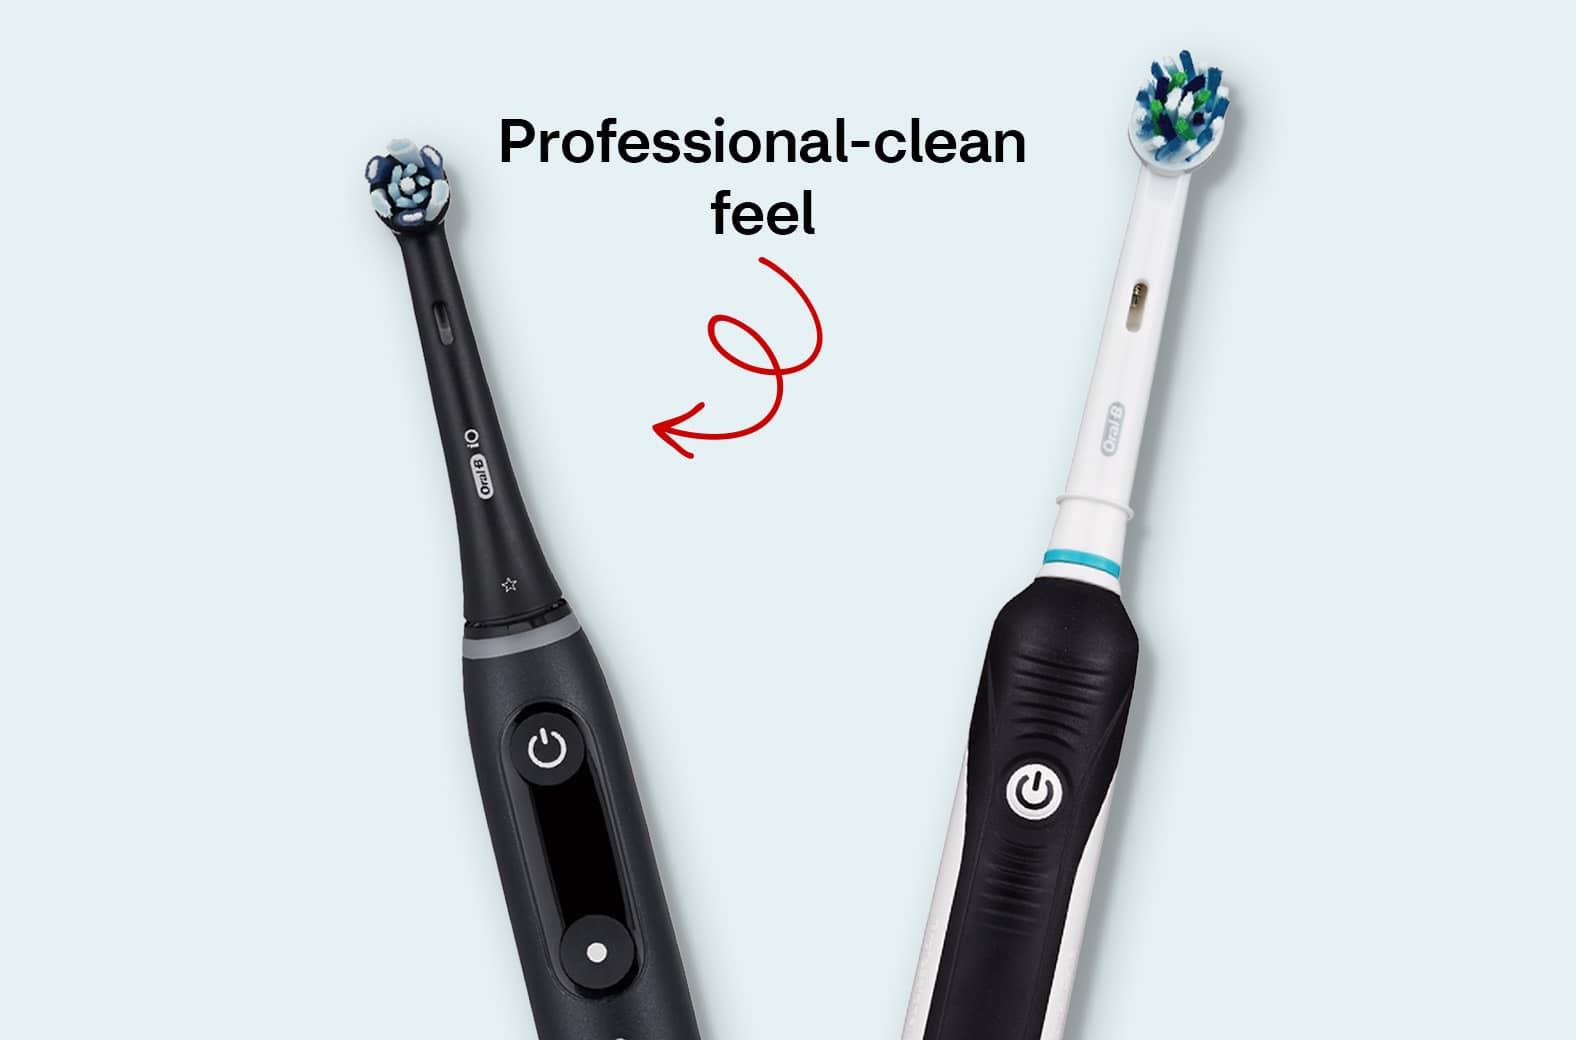 Professional-clean feel, power toothbrushes